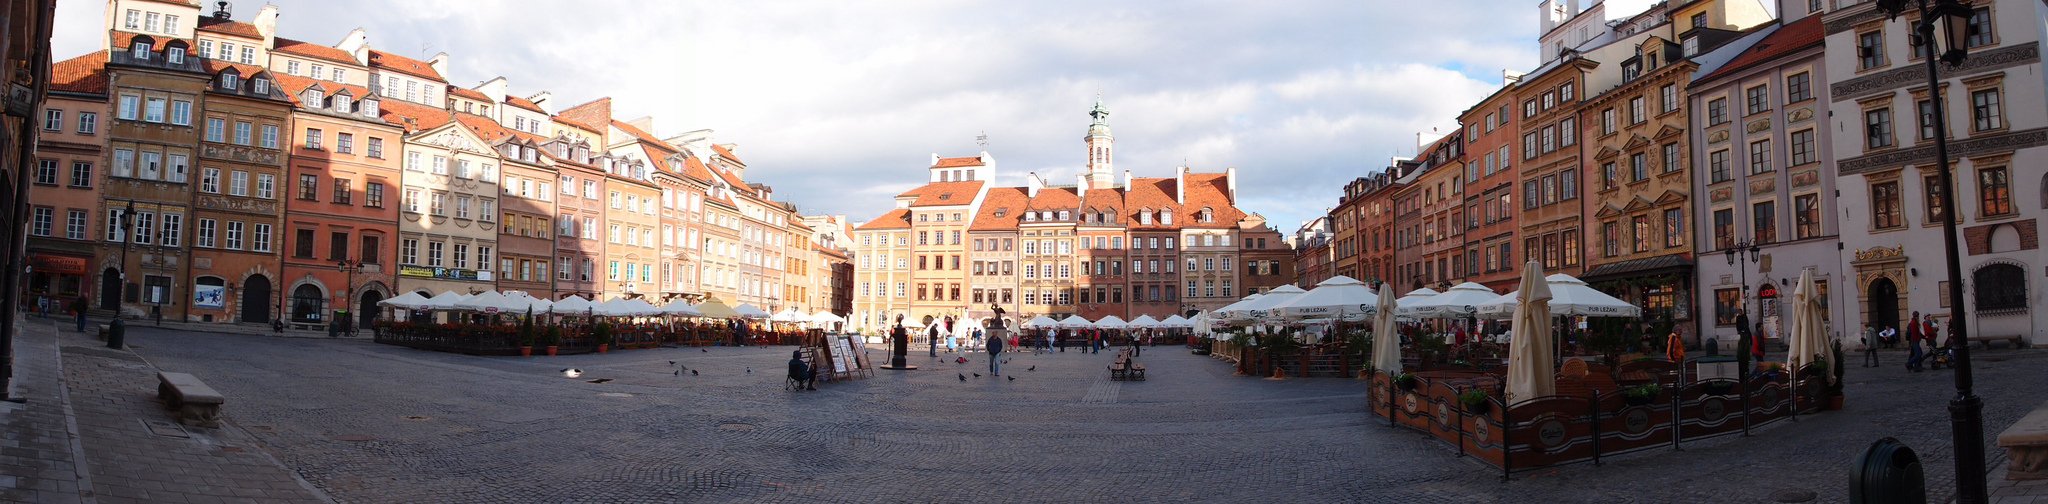 Warsaw Old Market Place, Poland